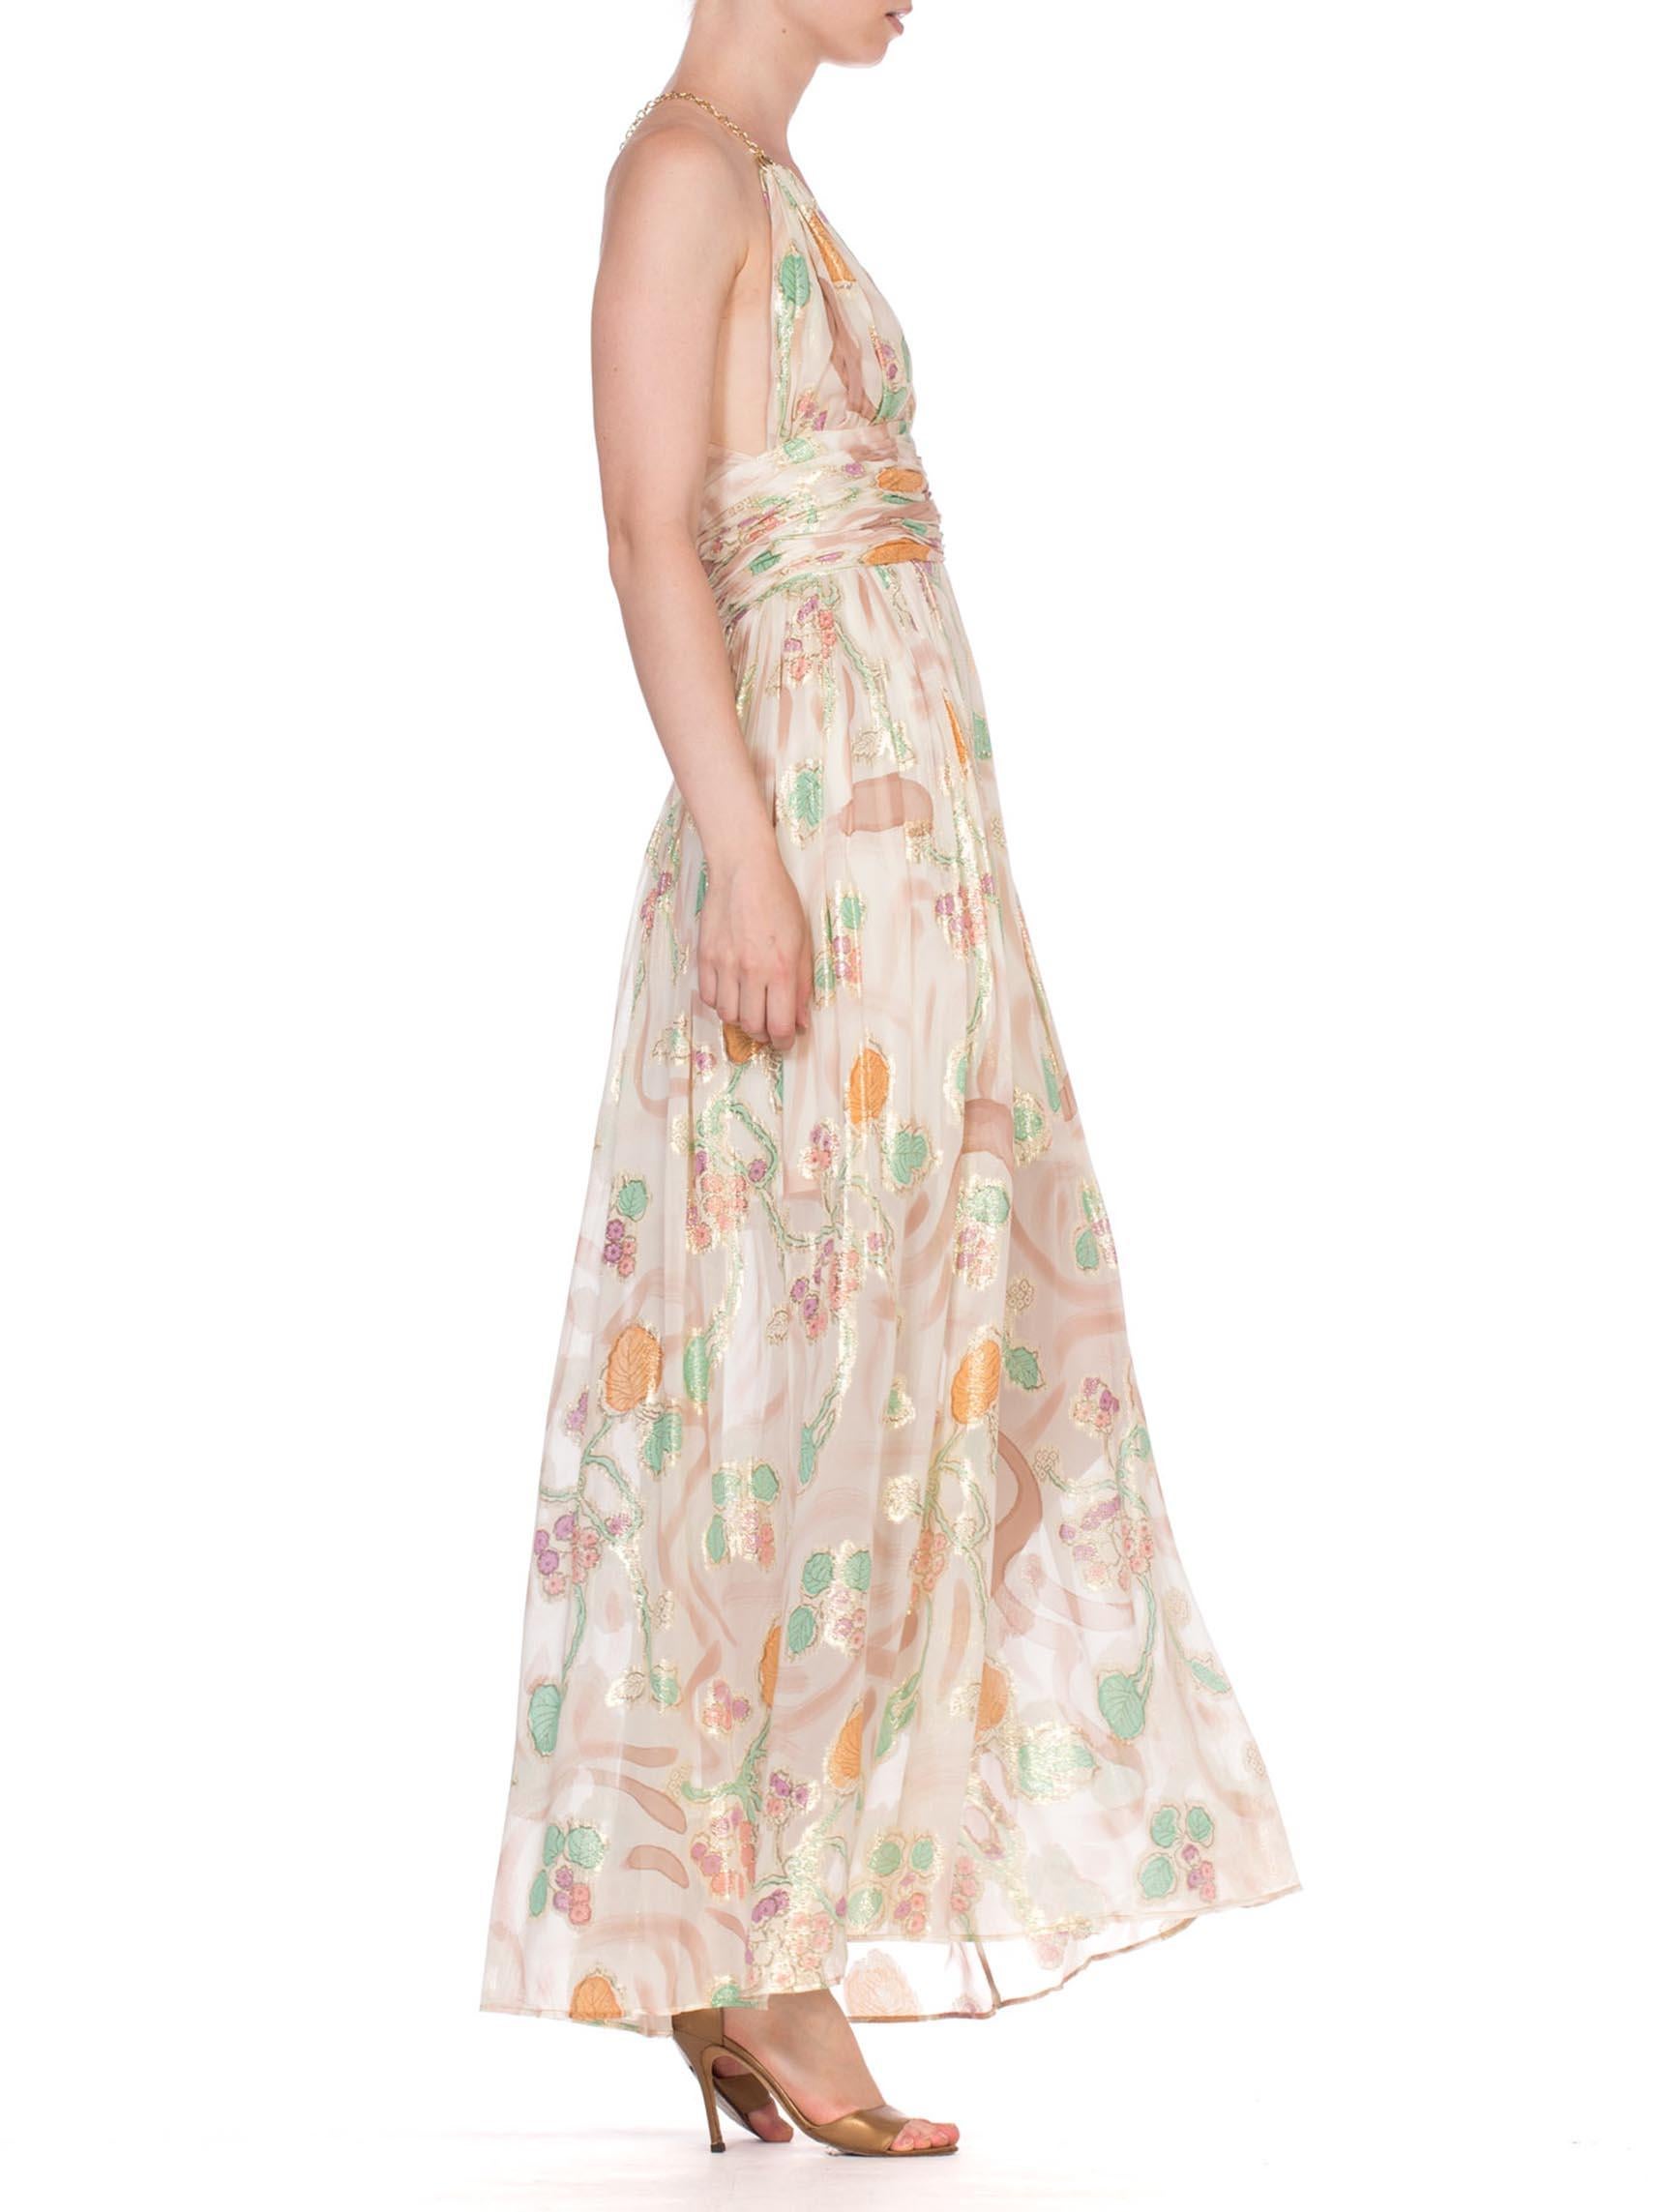 MORPHEW COLLECTION Hand Painted Silk Lurex Fil Coupé  Chiffon Gown With Gold Chain Straps
MORPHEW COLLECTION is made entirely by hand in our NYC Ateliér of rare antique materials sourced from around the globe. Our sustainable vintage materials